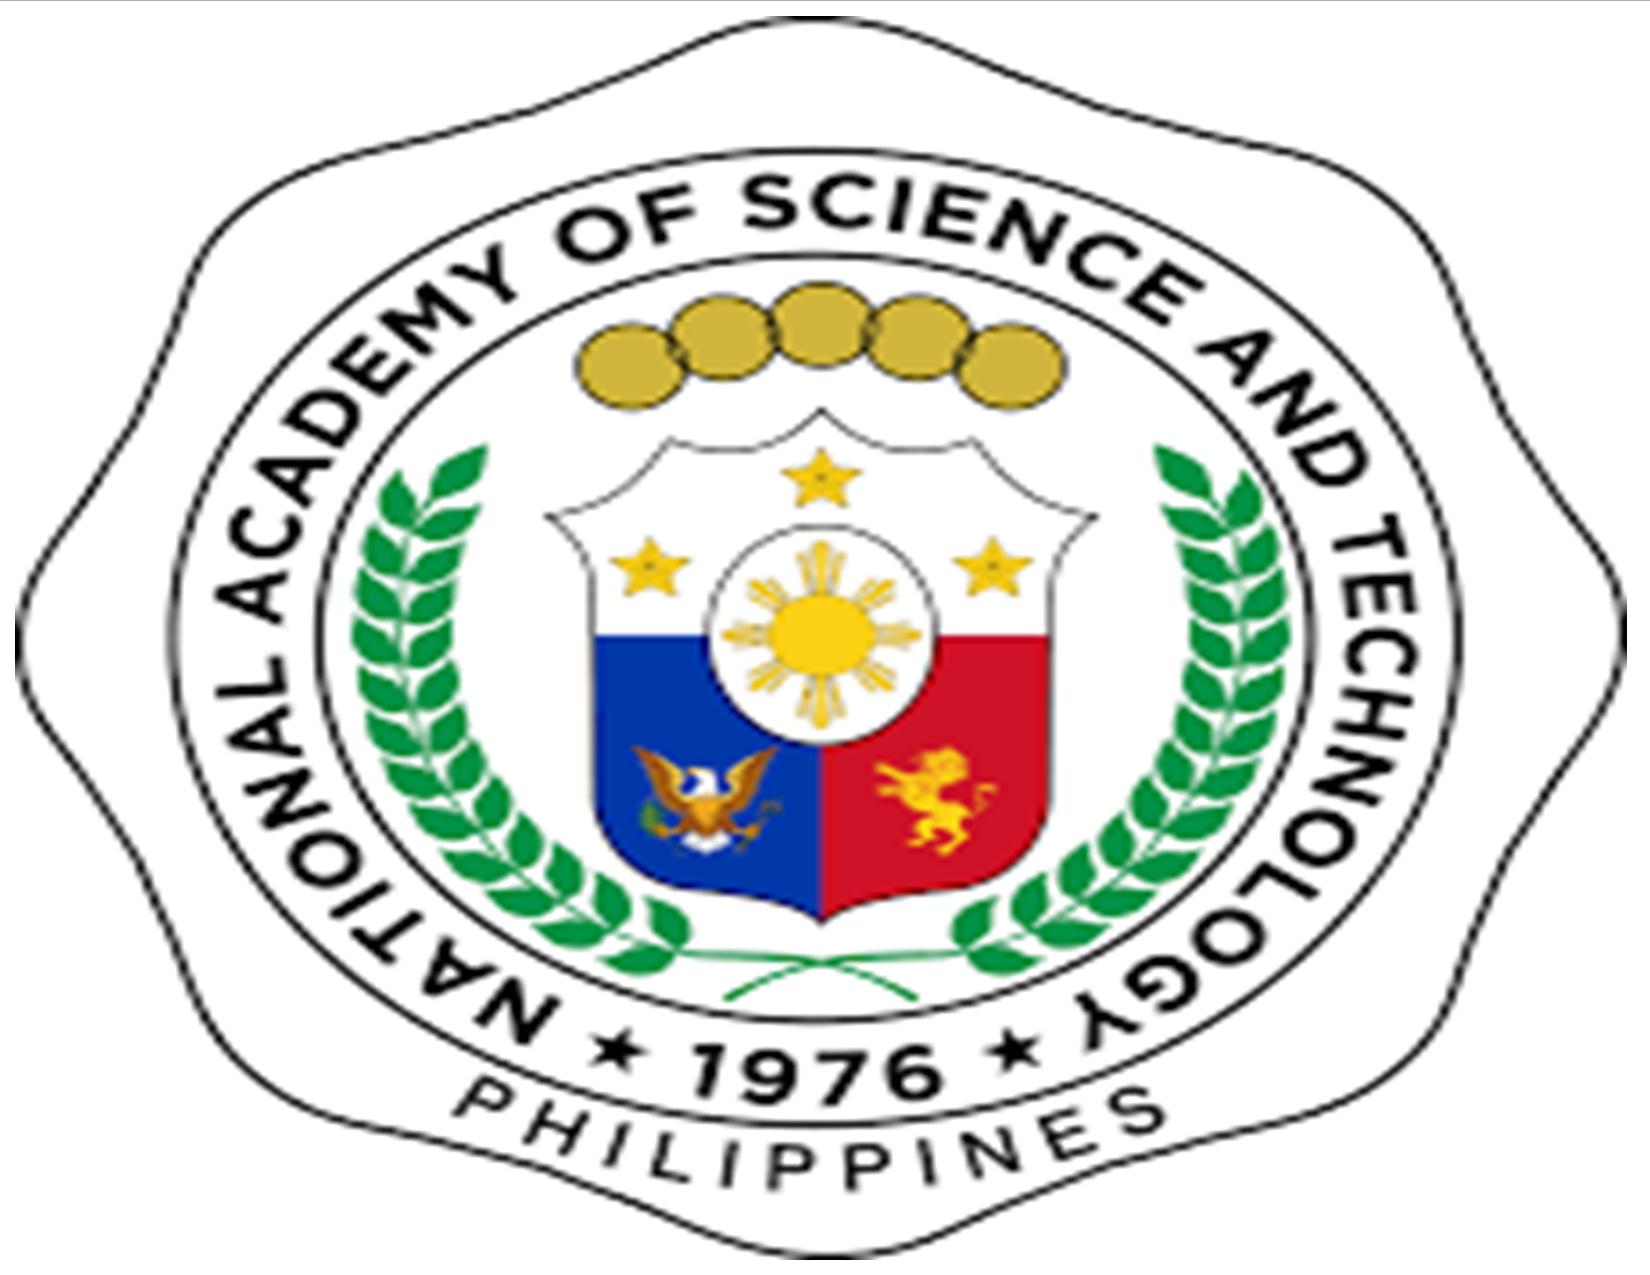 National Academy of Science and Technology Philippines